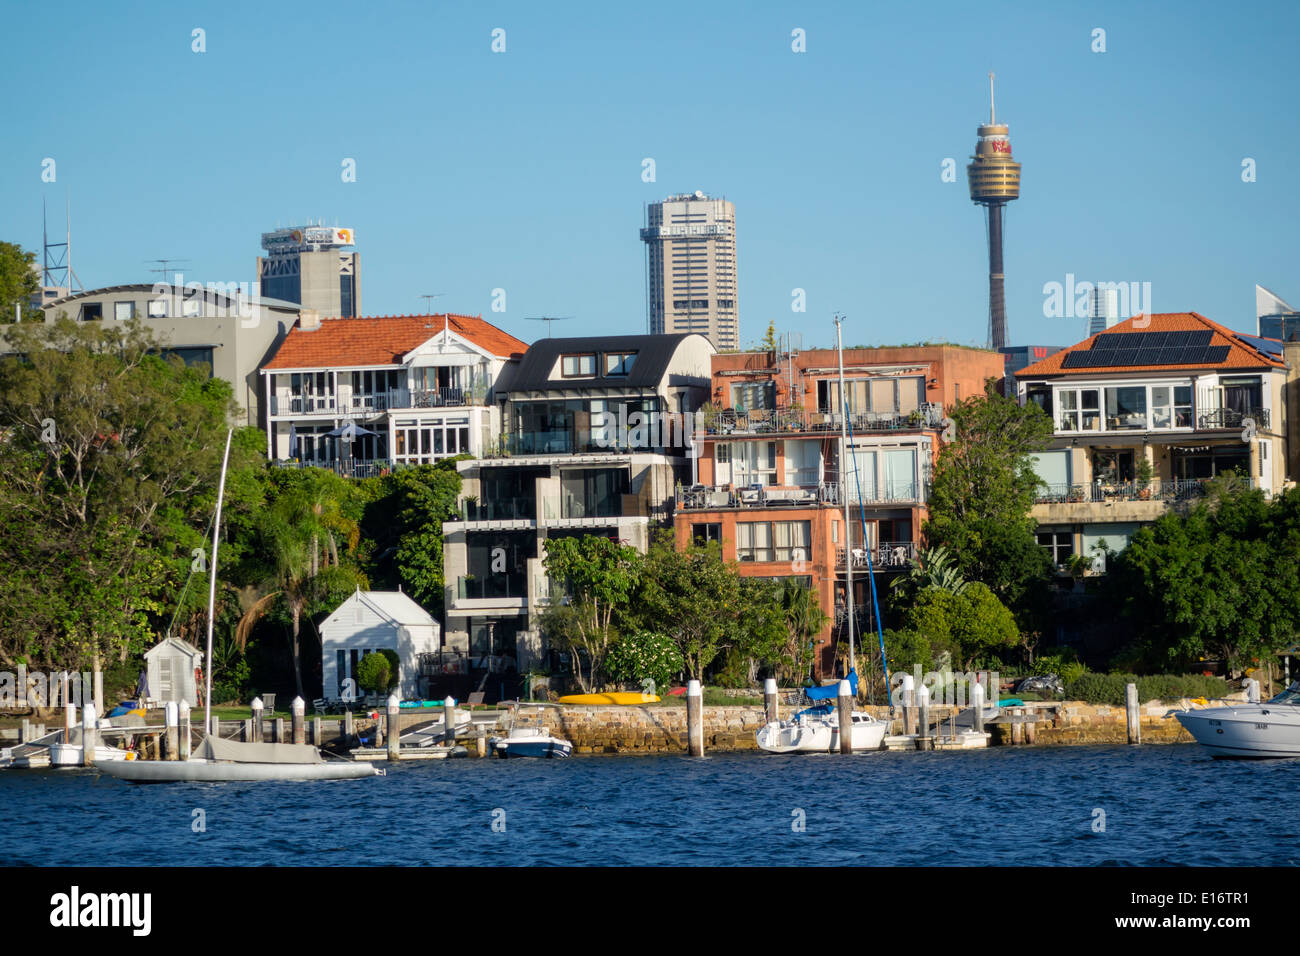 Sydney Australia,New South Wales,Harbour,harbor,water,waterfront,homes,houses,Birchgrove,Balmain,CBD Central Business,District,Tower,skyscrapers,city Stock Photo